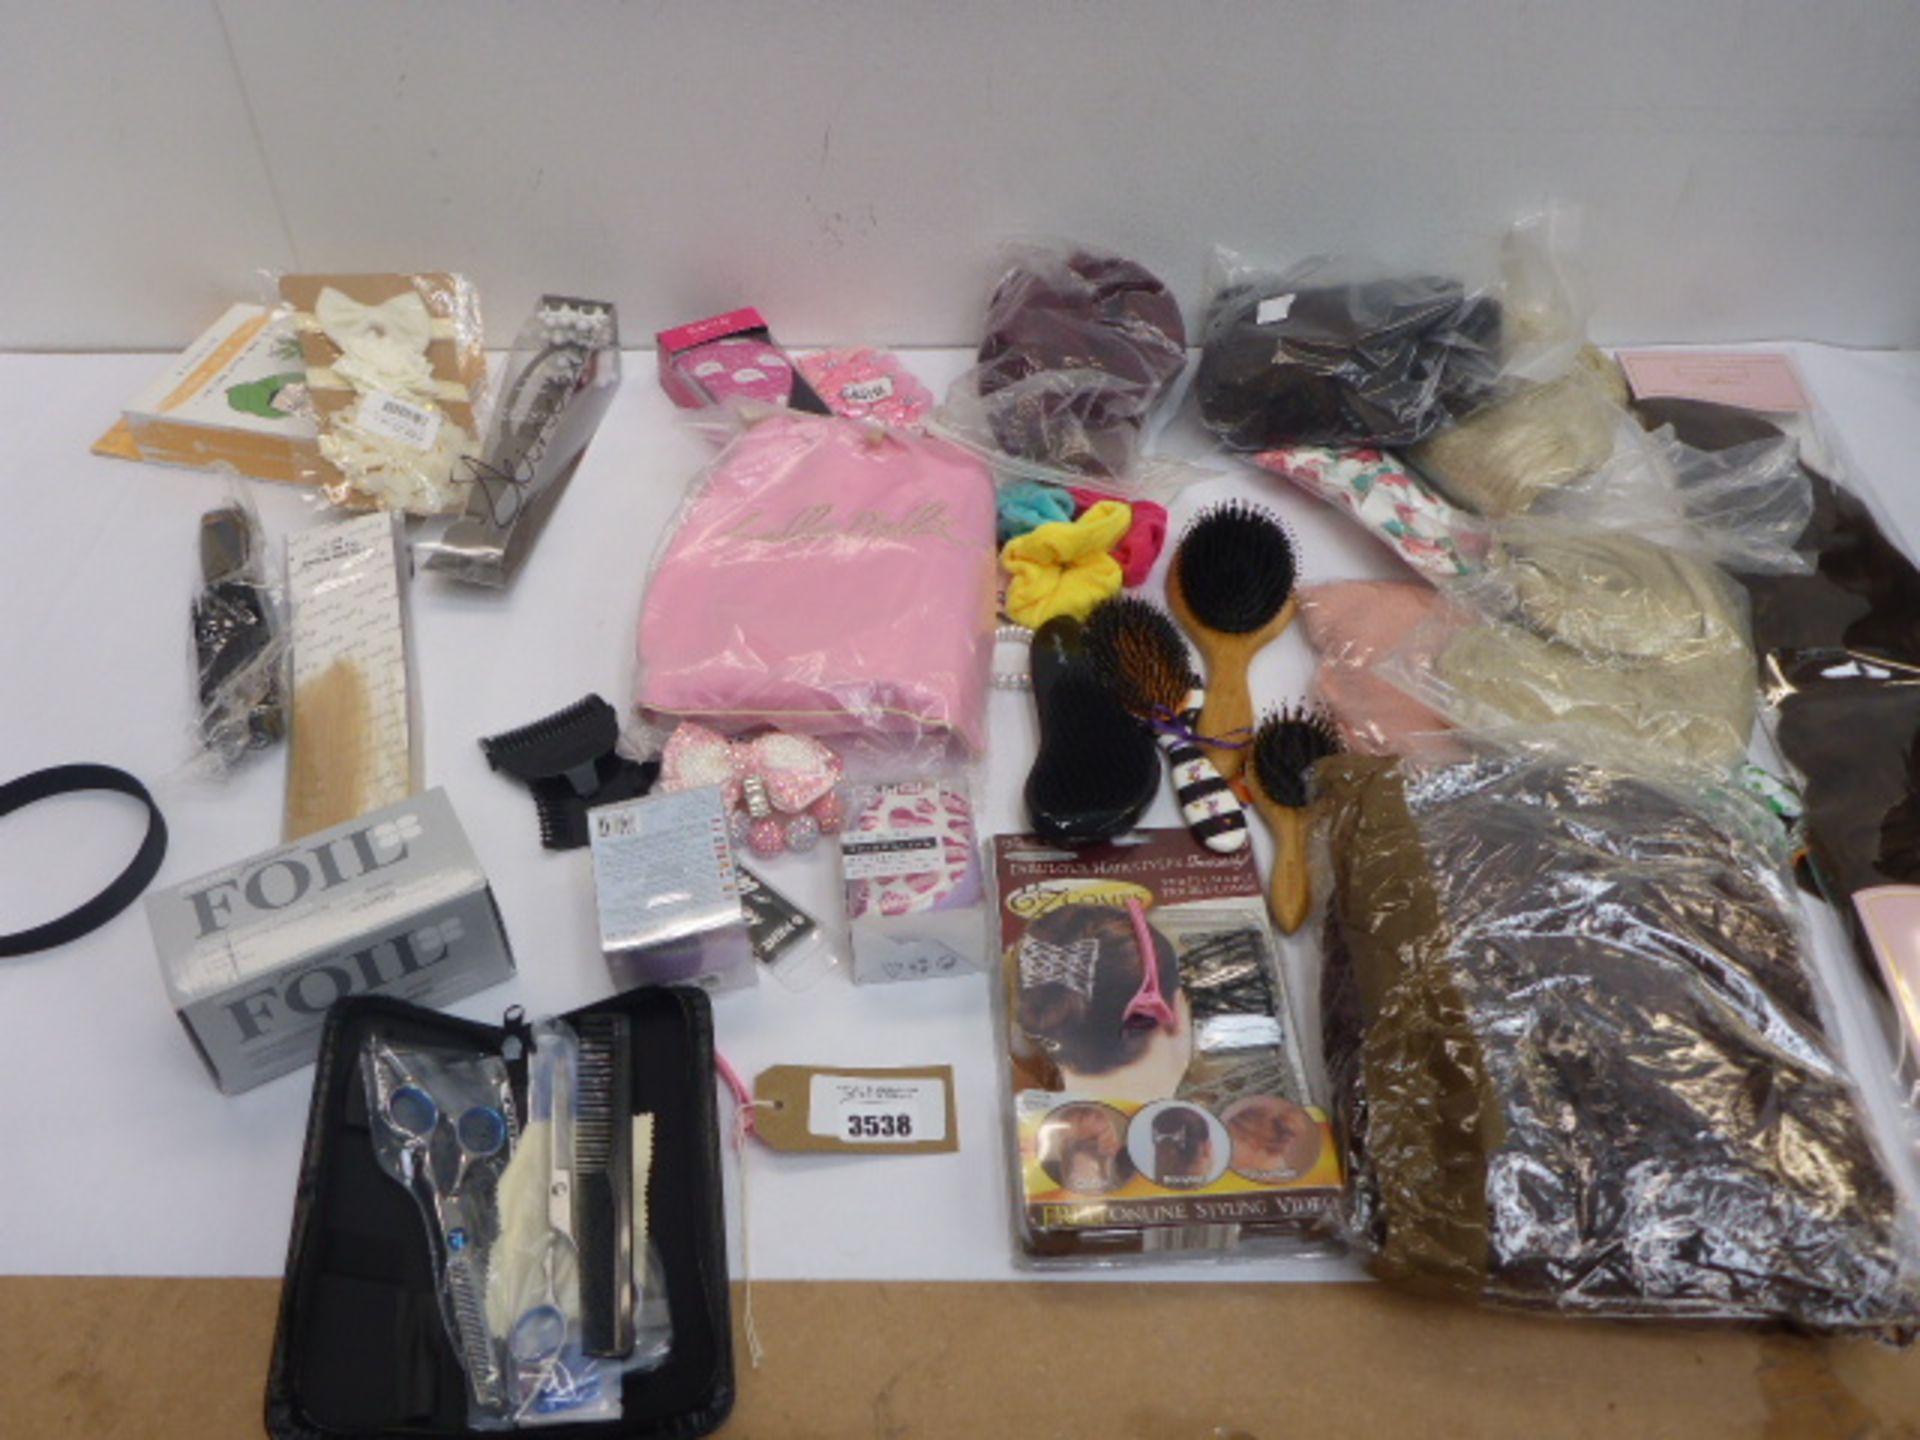 Selection of wigs, hair decorative accessories, hair scissor set, highlighting foils, hair brushes